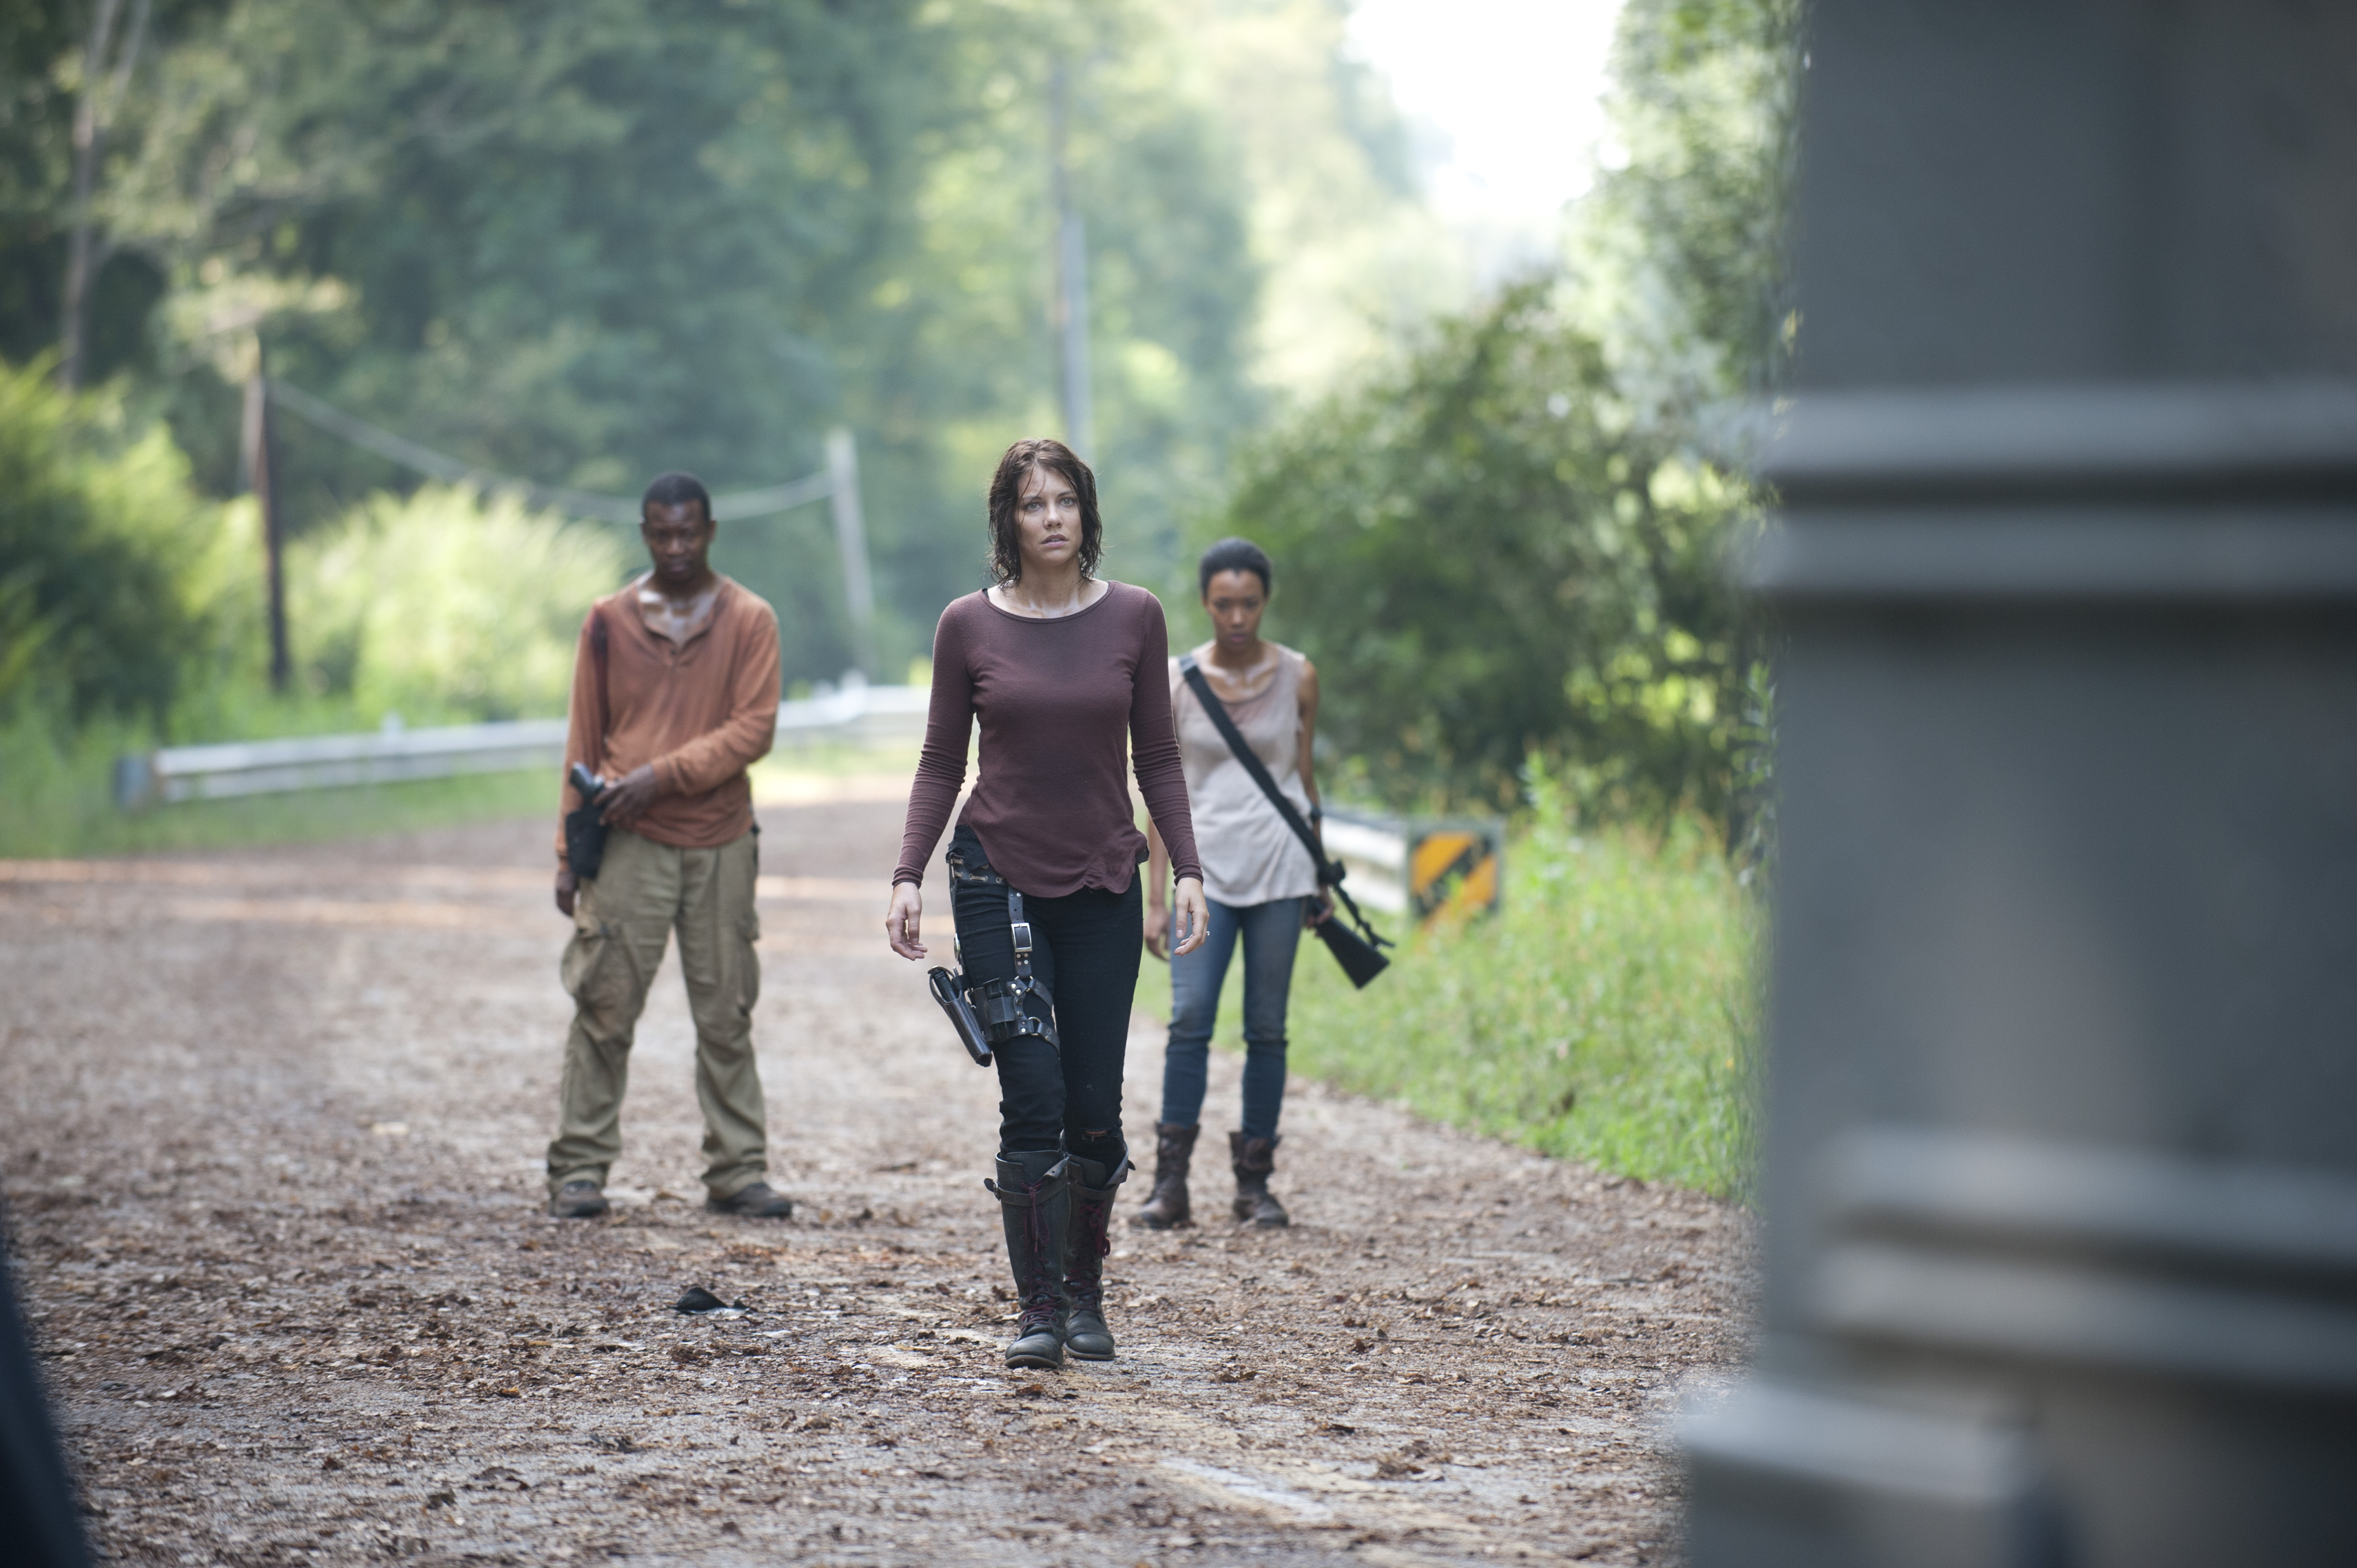 http://img4.wikia.nocookie.net/__cb20140217202533/walkingdead/images/e/ef/Inmates_Maggie_Bob_and_Sasha_Search.png